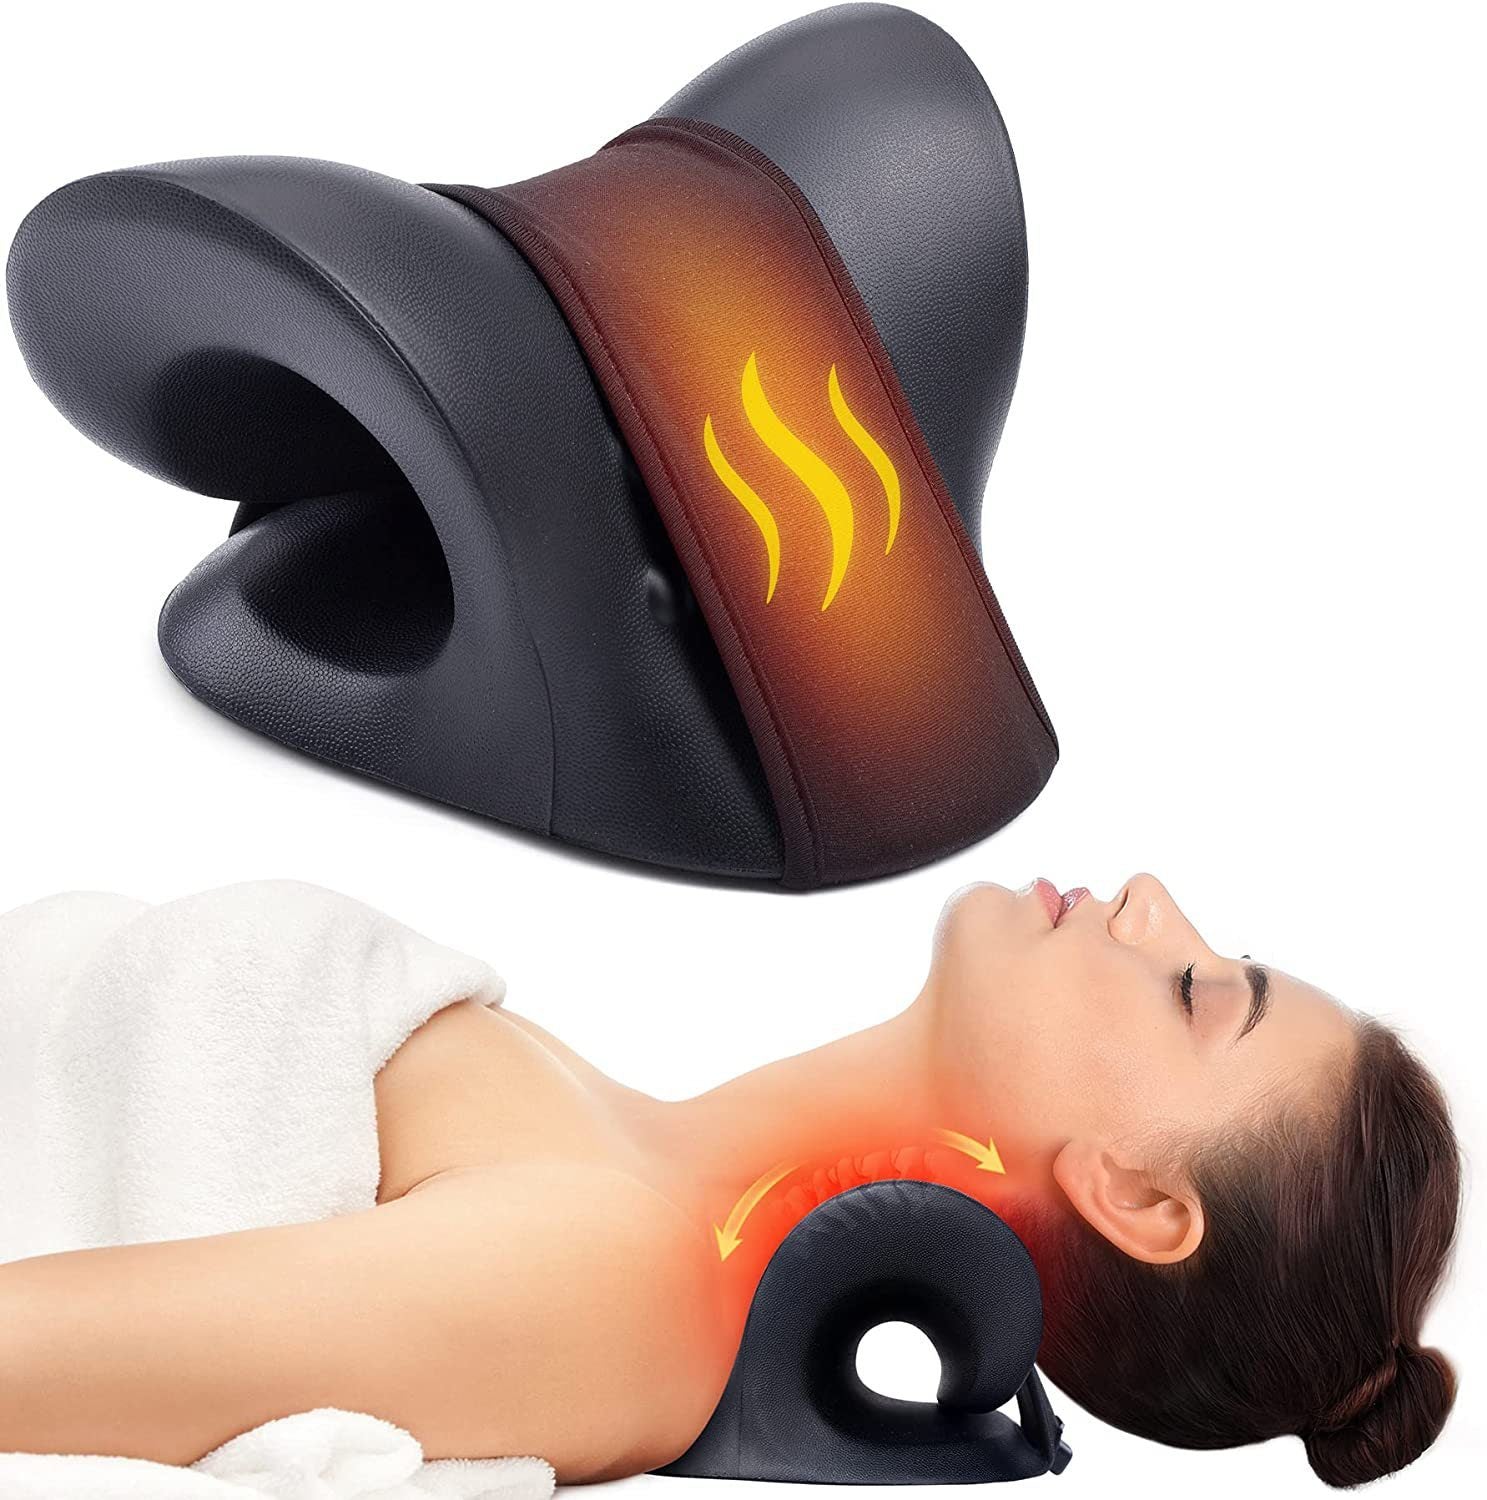 Neck and Shoulder Relaxer, Cervical Traction Device for TMJ Pain Relief, and Cervical Spine Alignment Pillow - promeedsilk